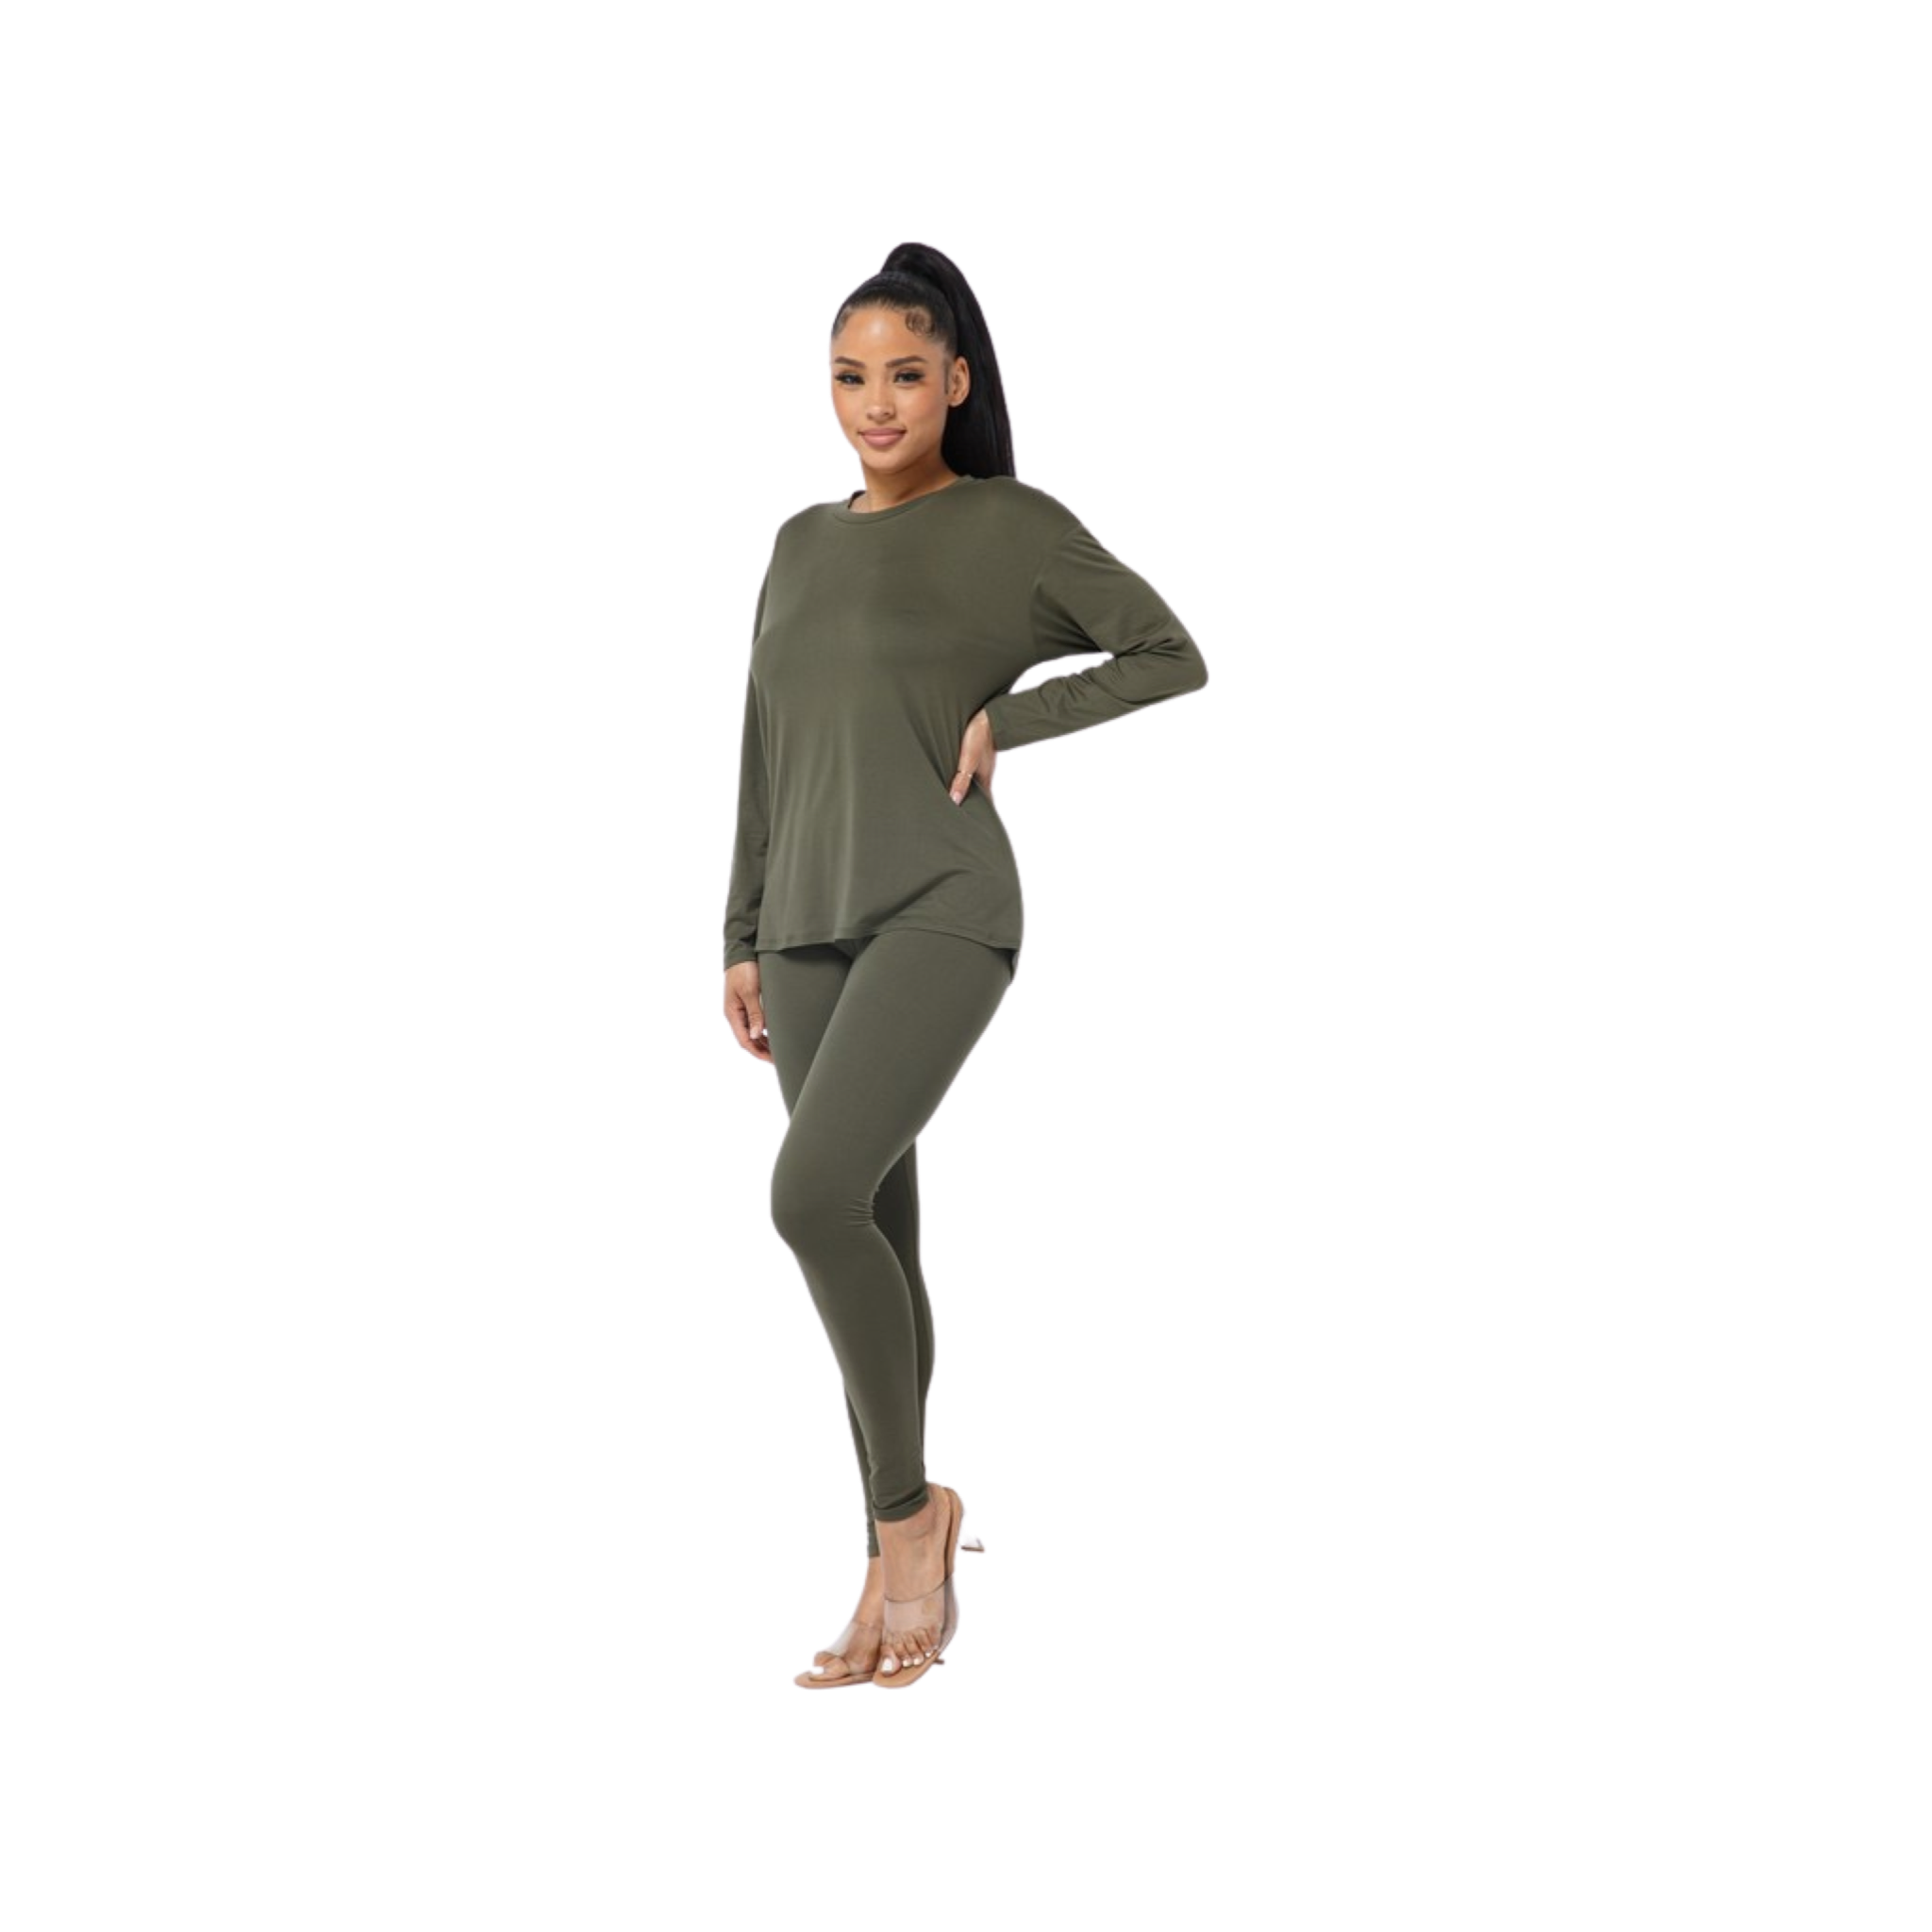 Solid Color Round Neck Pullover Long Sleeve Front Short Back Long Split  Dress Mid Length Women Shirt Workout at Amazon Women's Clothing store